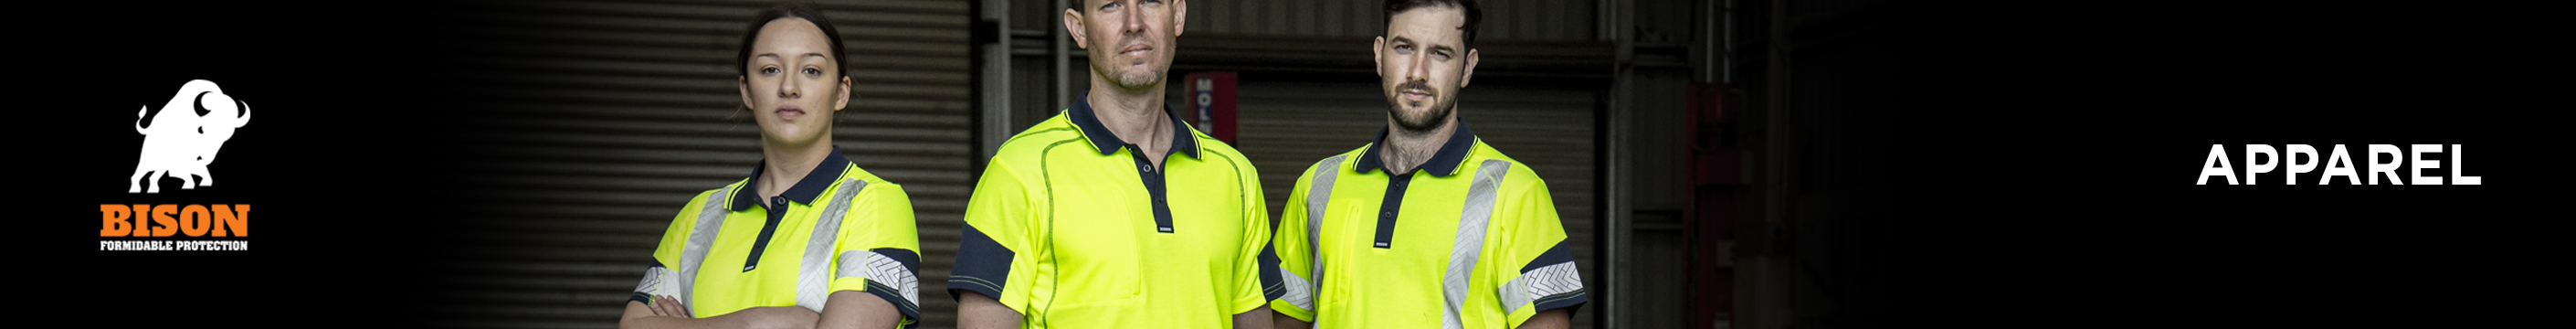 <img alt="Bison Workwear Apparel" src="/images/CategoryImages/BISON/Bison_Category banners_Apparel-min.jpg?u=1Ye8As" data-bind="attr: { src: imageUri }">
<h1>APPAREL</h1>
<div>
<div><span style="font-size: 14px;">As a leading apparel and workwear supplier, we have a range of high quality innovative workwear developed with safety standards and comfort in mind. Design features set these garments apart, in style and innovation.&nbsp; This includes superior level of performance and comfort, ensuring the team you&rsquo;re fitting out will simply stand out.<br><br><br></span></div>
</div>